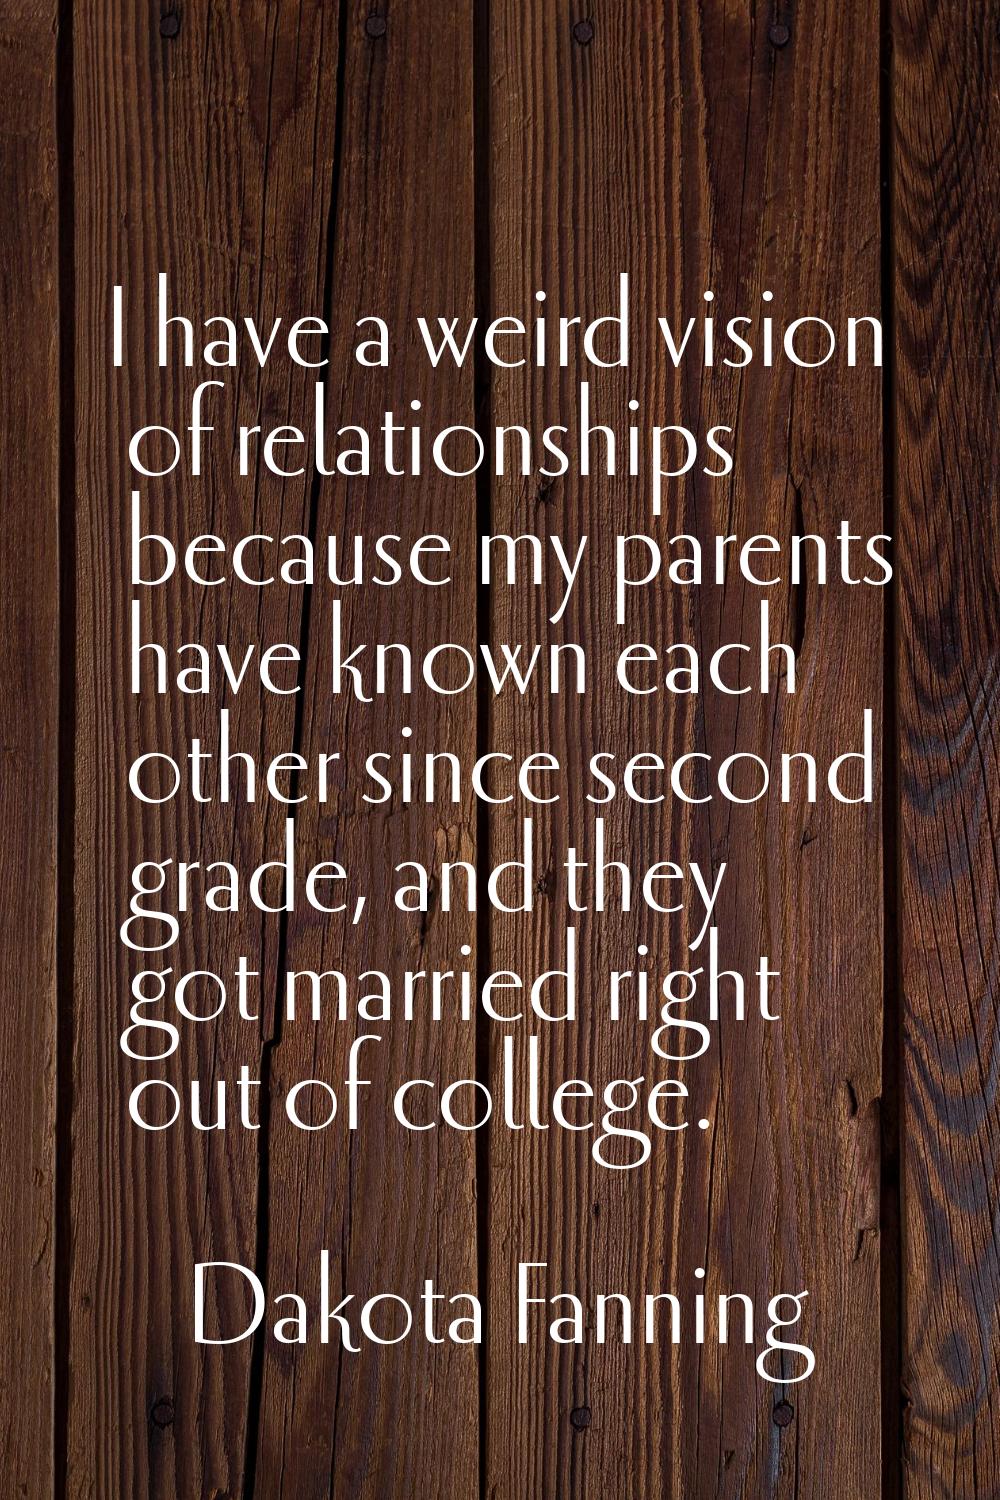 I have a weird vision of relationships because my parents have known each other since second grade,